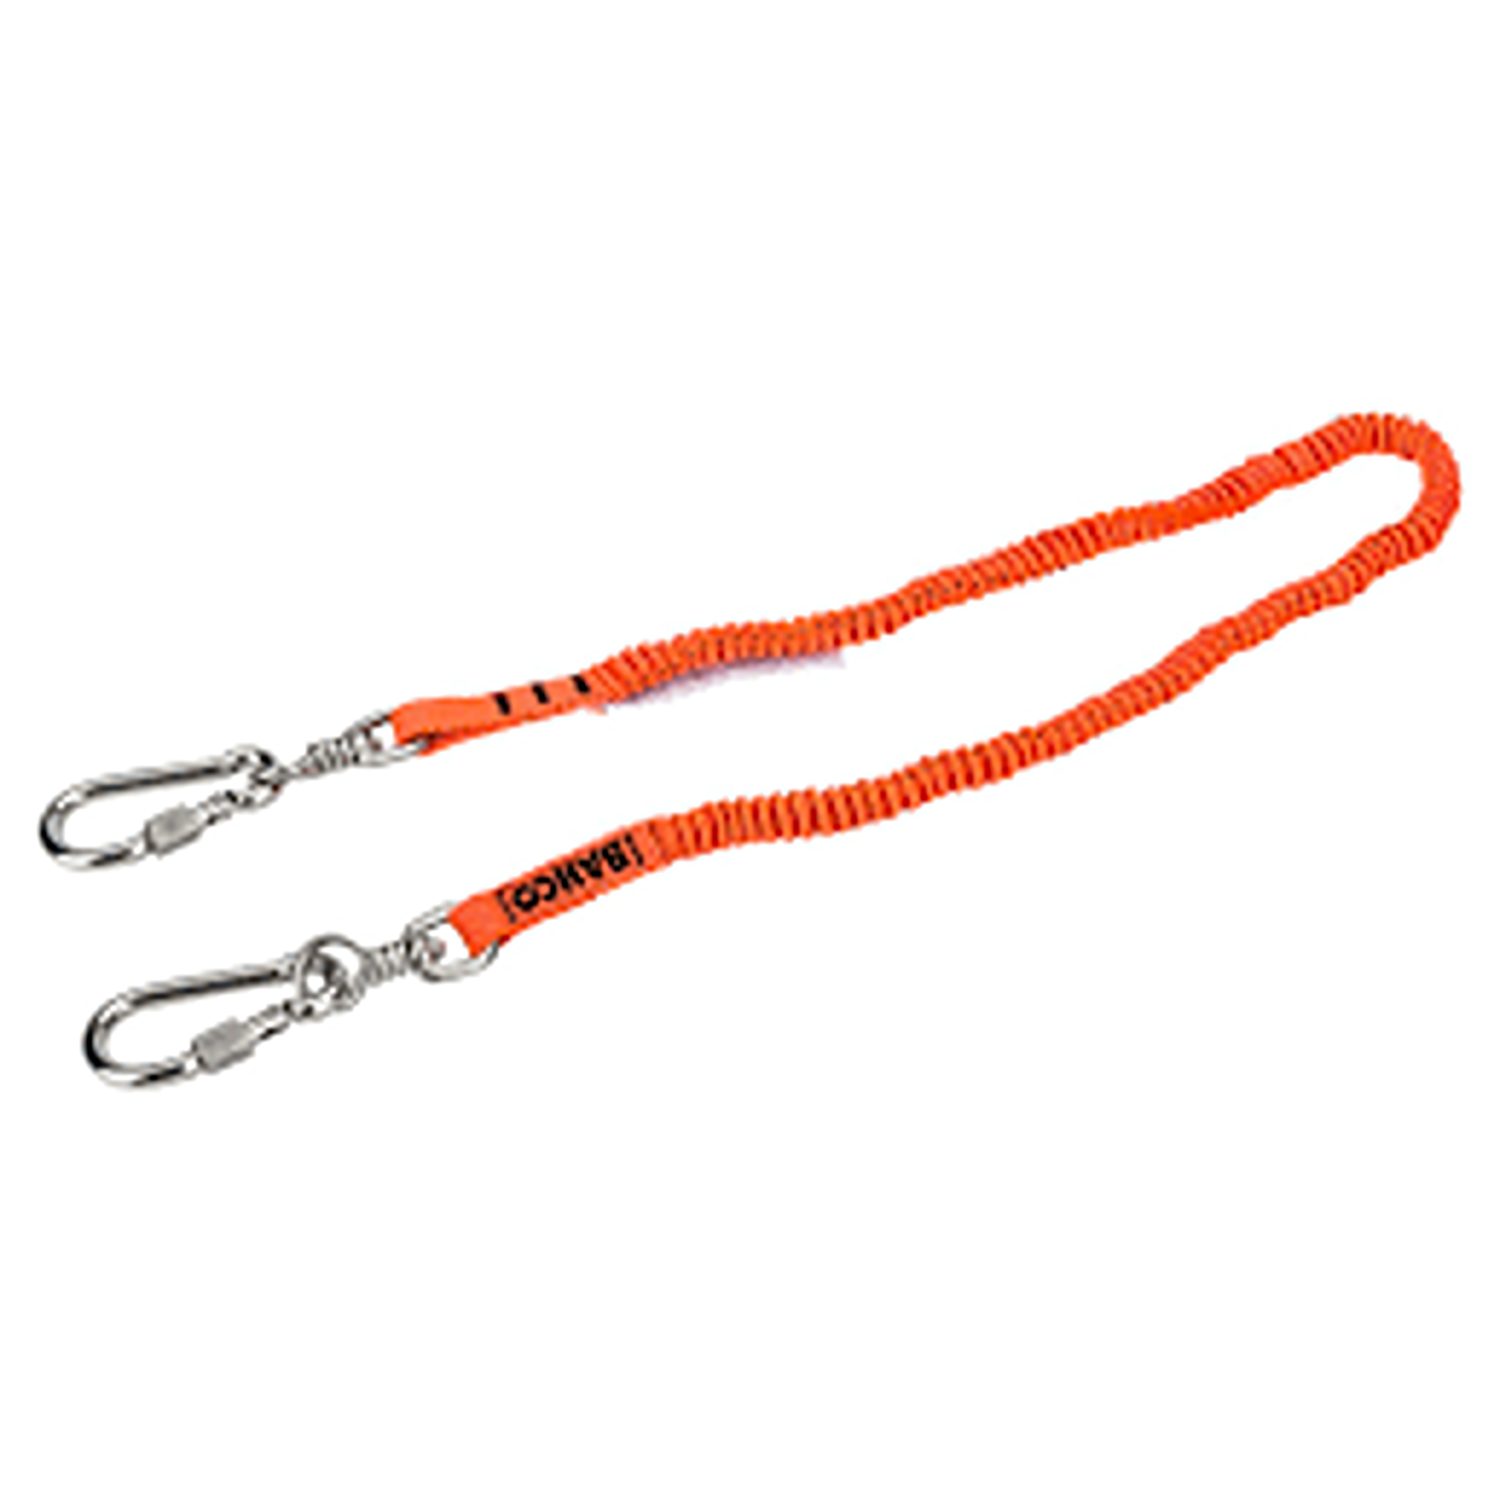 BAHCO 3875-LY6 Strap Lanyard with Swivel Carabiner 1 kg - Premium Lanyard from BAHCO - Shop now at Yew Aik.